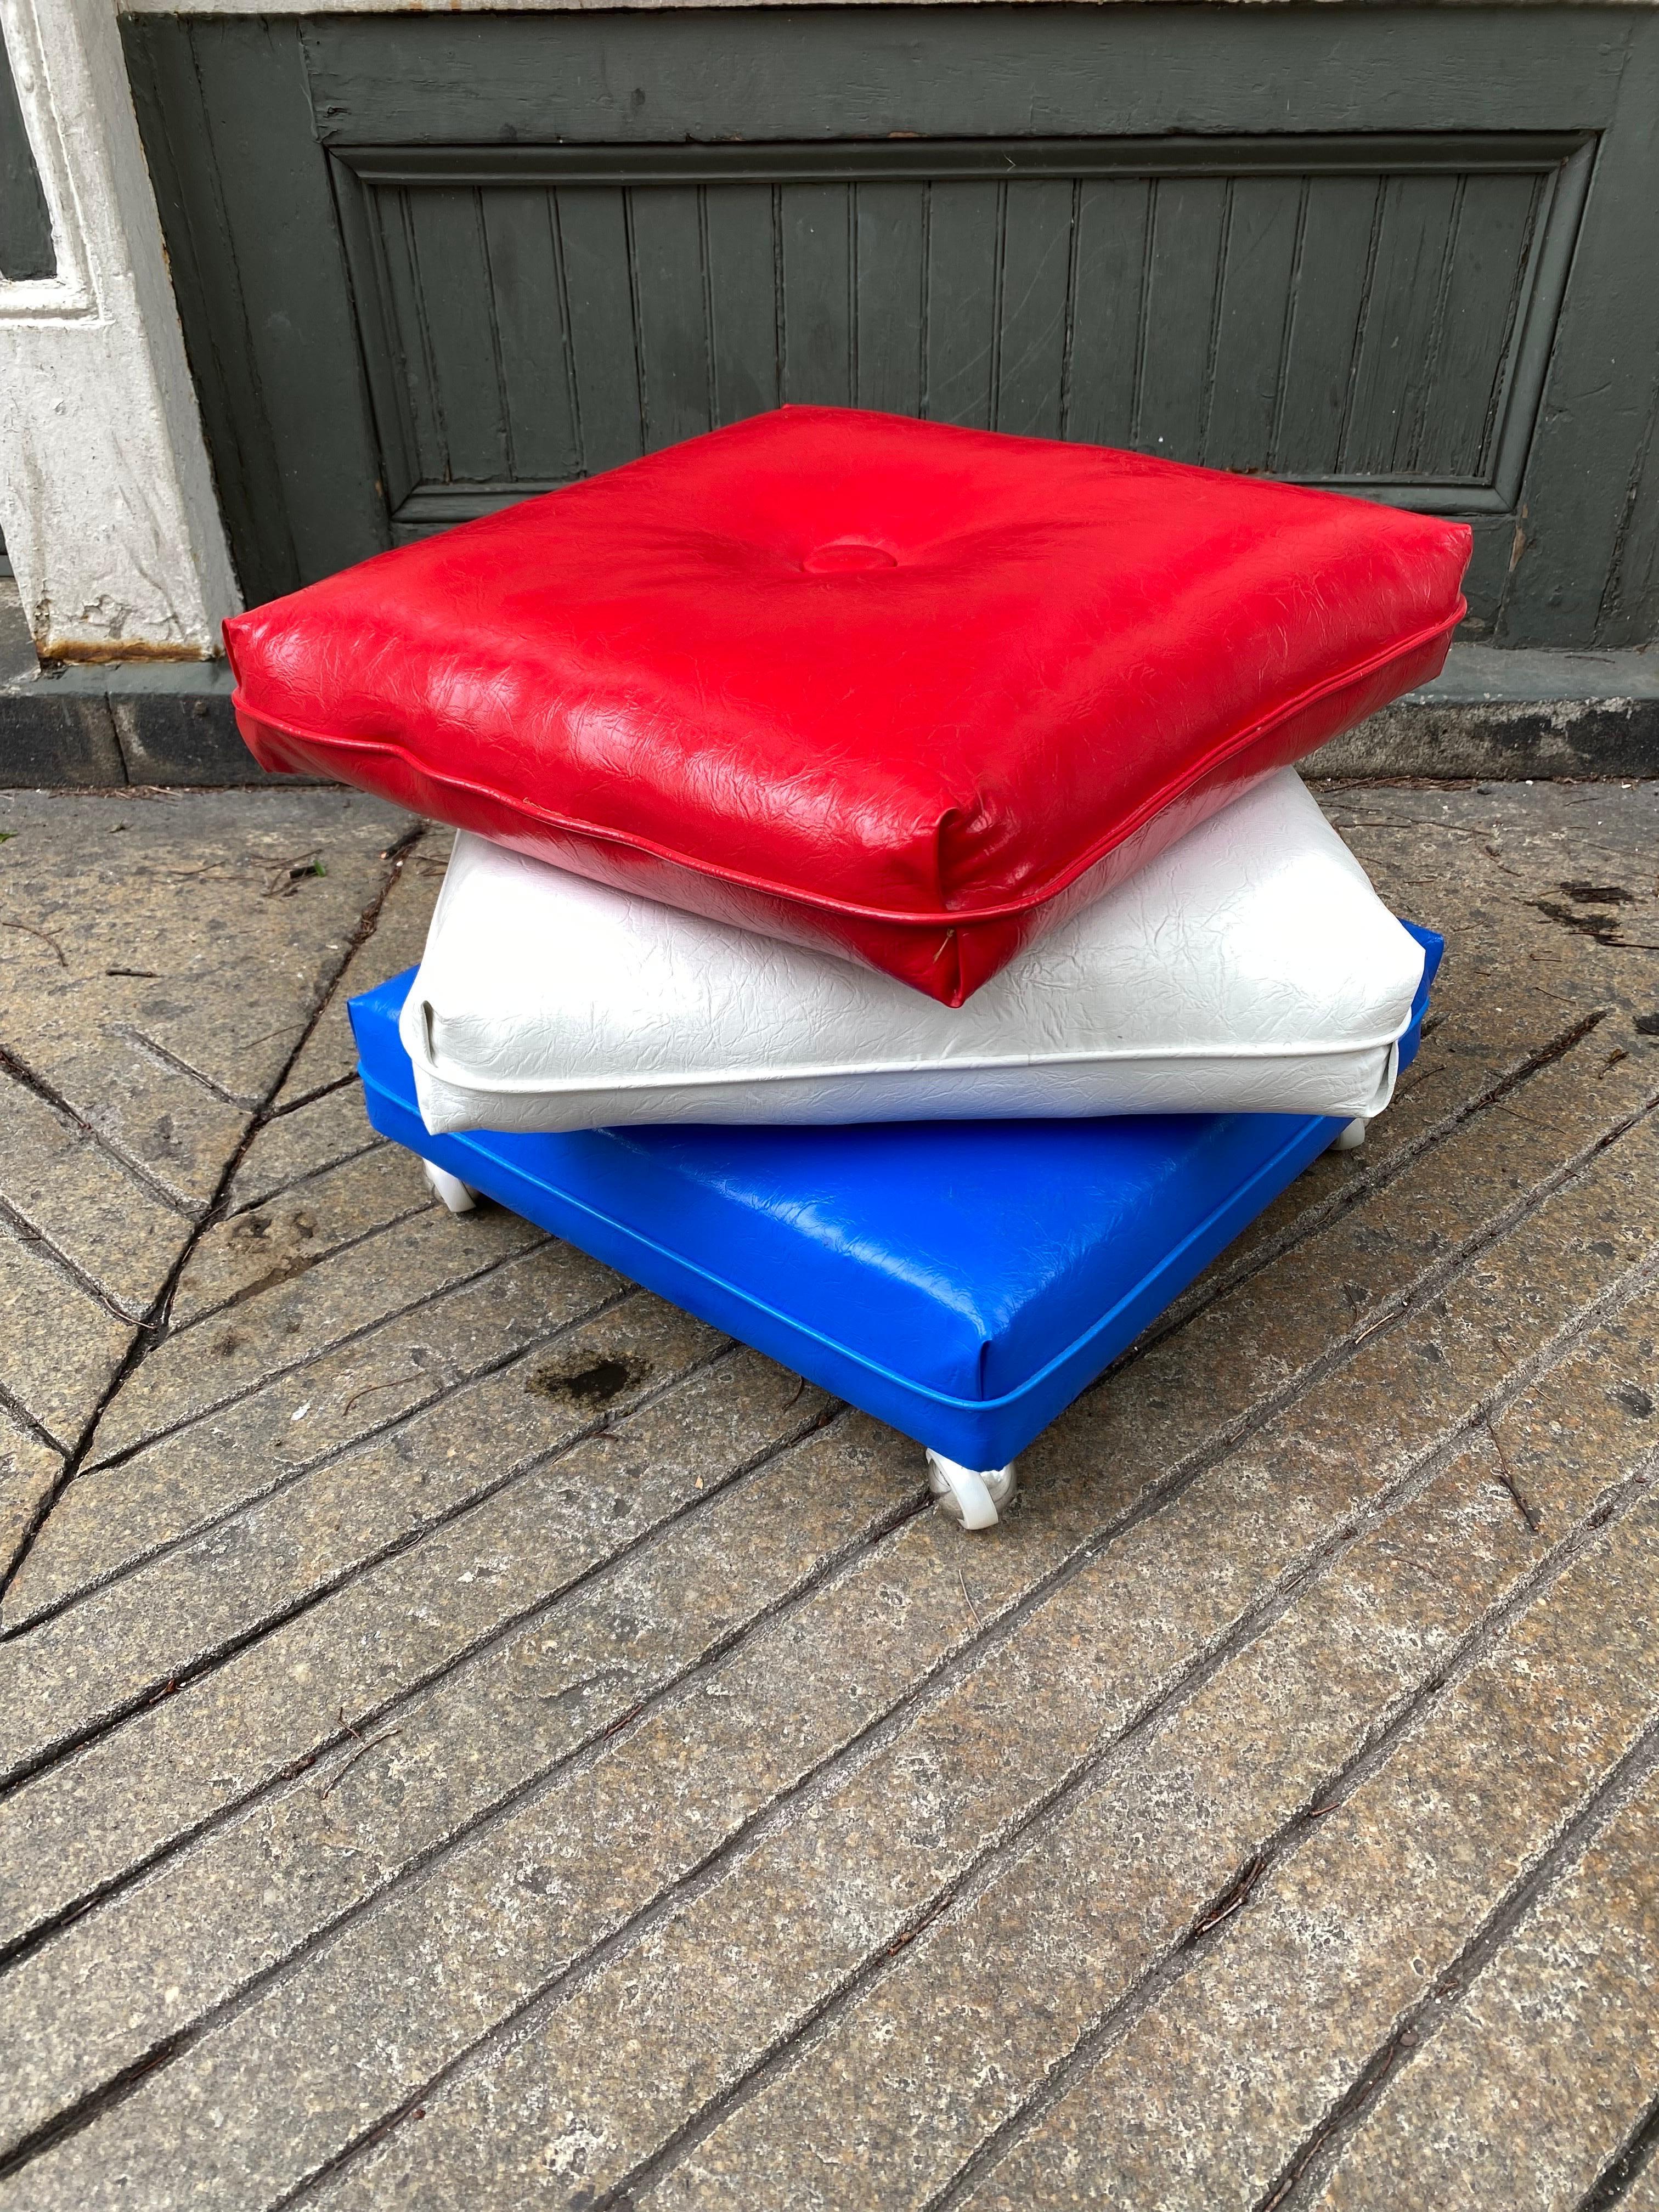 Red, White and Blue Stacked Pillows Ottoman on Wheels. In very nice Original condition! Vinyl is very clean! Bottom Pillow has casters so ottoman moves easily! Great period piece in great unrestored condition!